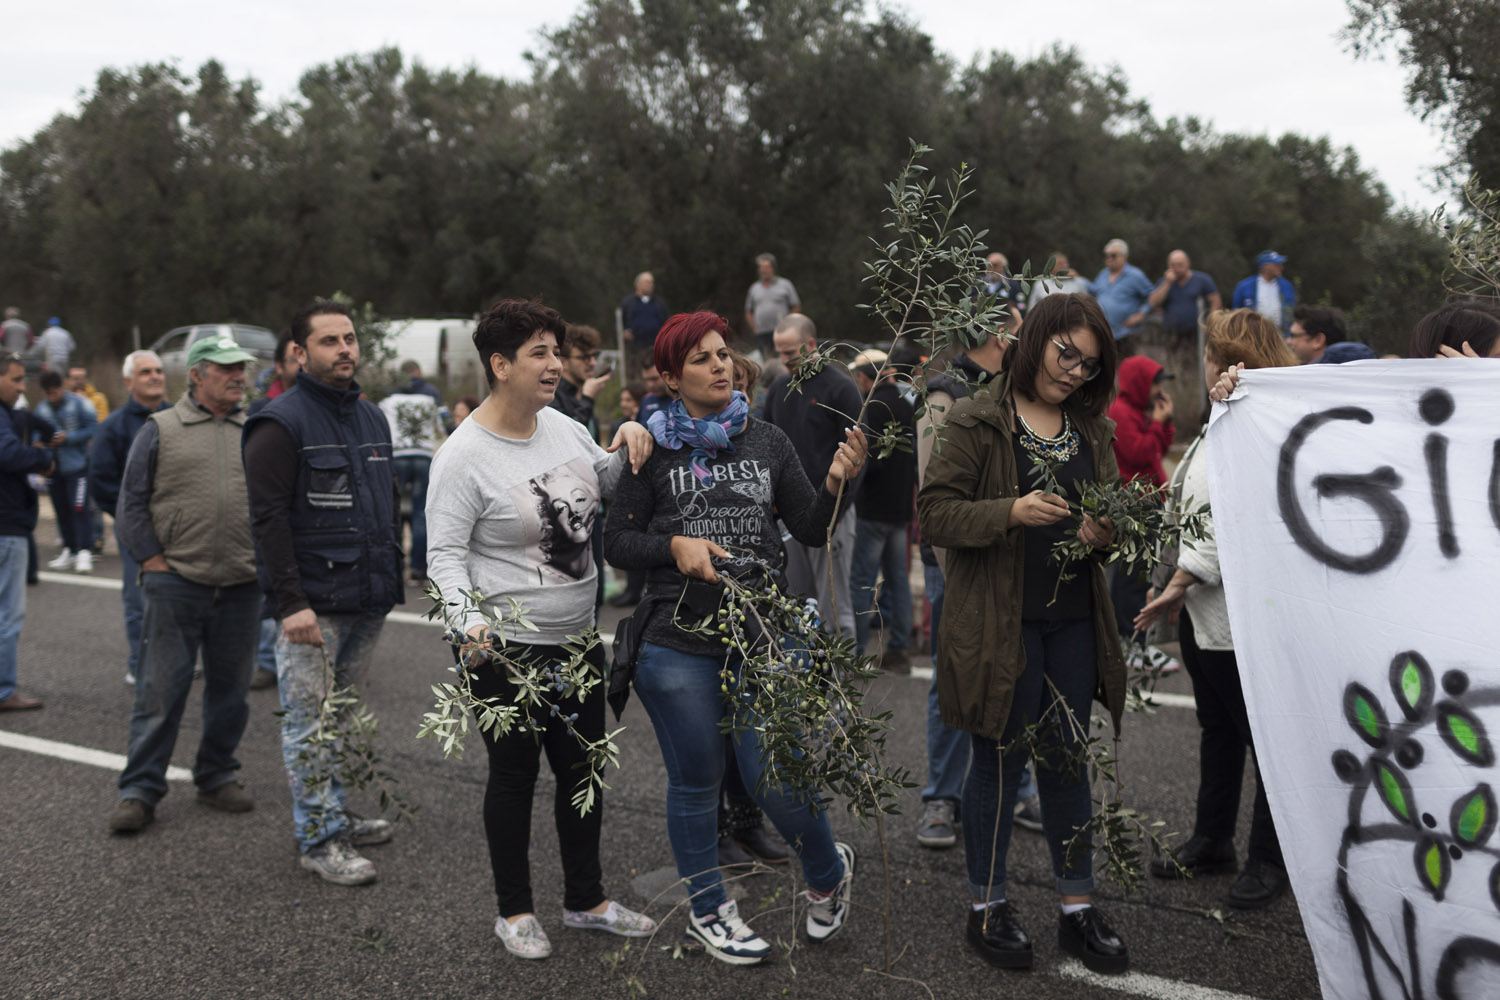 Blocking a motorway to protest the eradication of olive trees in Torchiarolo, as part of the authorities' plans to contain the Xylella fastidiosa outbreak. Fuelled by online conspiracies and a general distrust of the government, grassroots movements have mobilized wherever the authorities have tried to implement their containment plans, pointing to a failure to take into account the population's views and its attachment to olive trees. (2015)